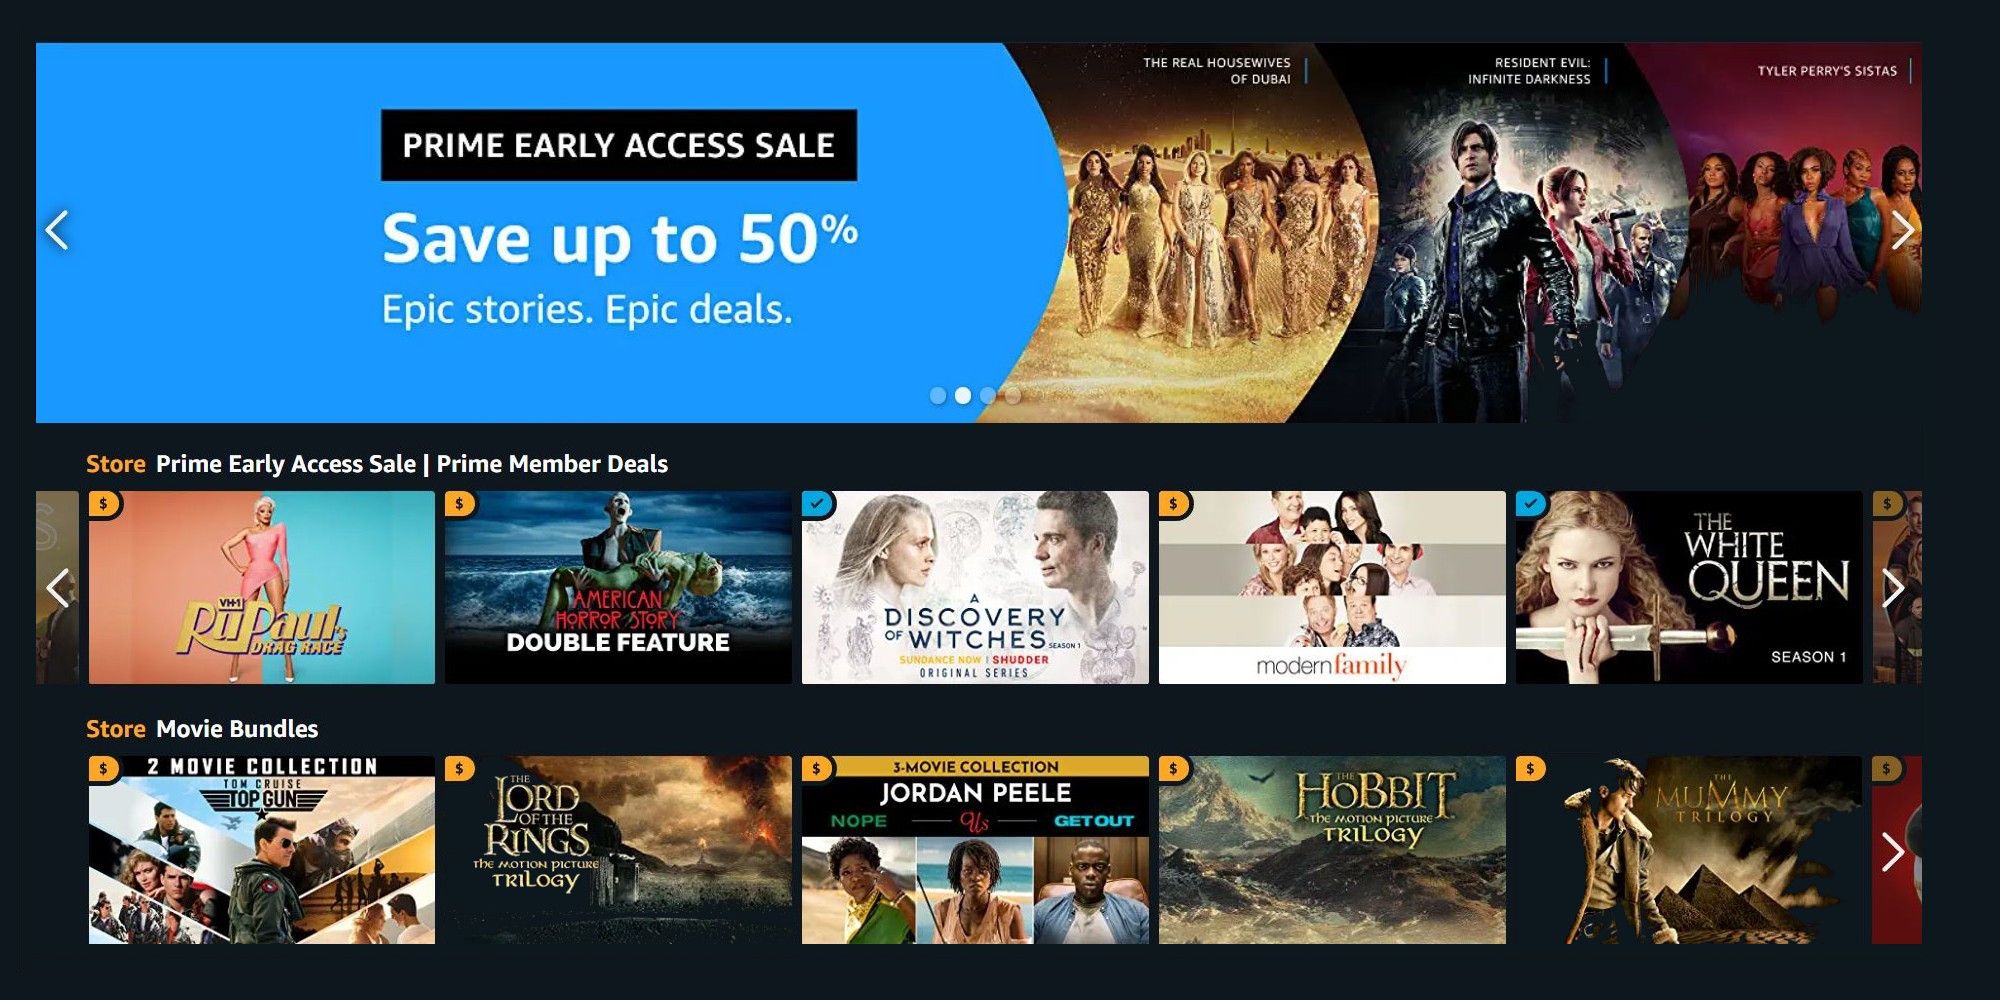 Prime Early Access Sale: Prime Video Up To 50% Off